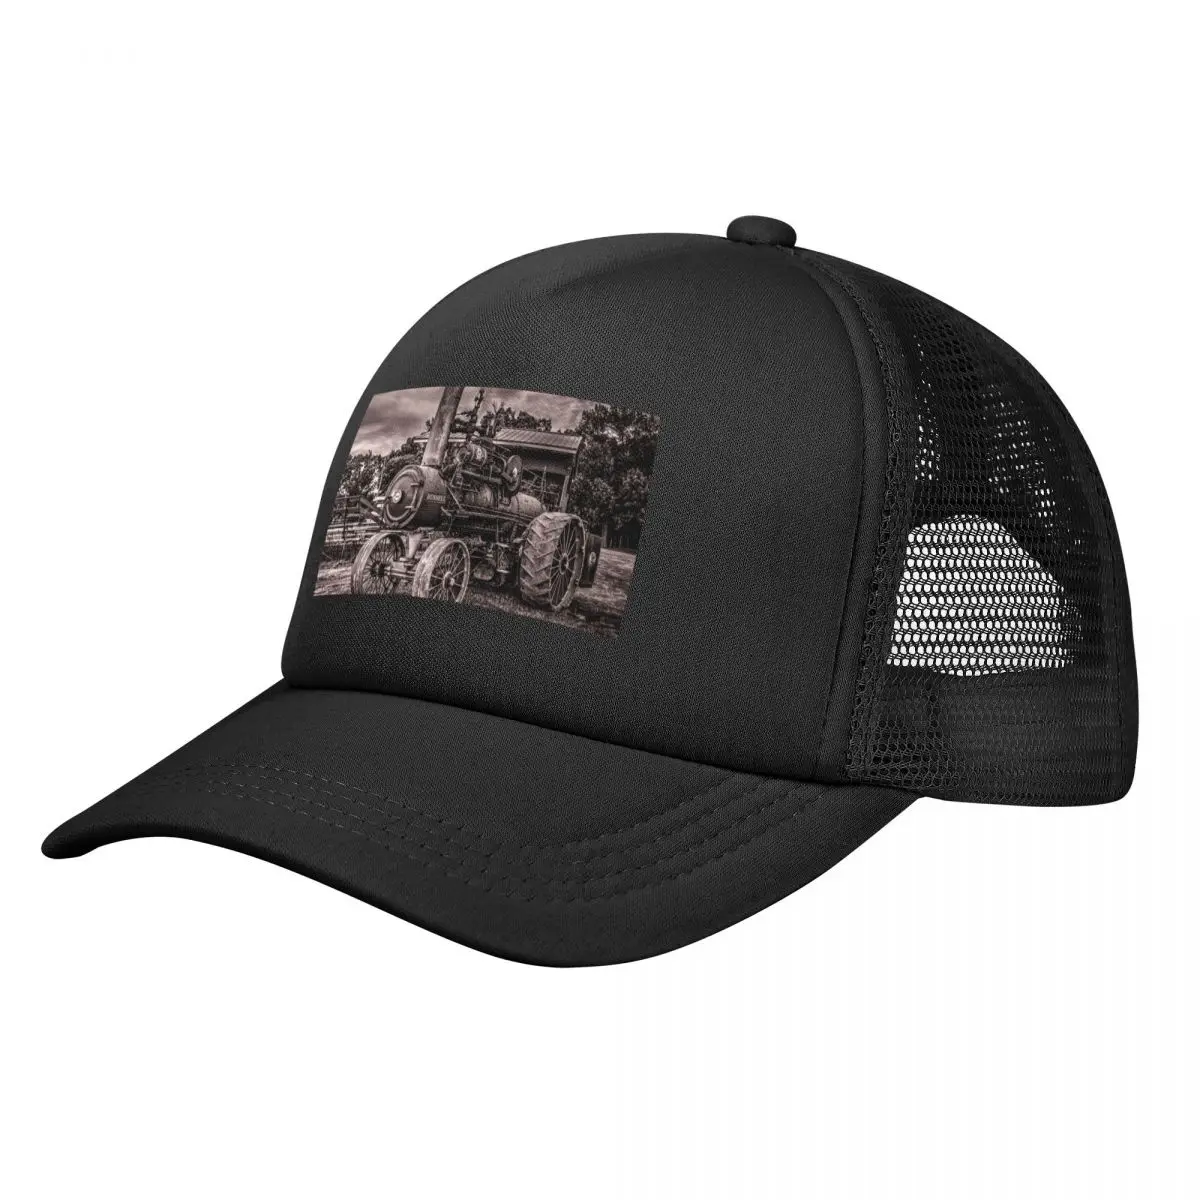 

Russell Steam Traction Engine at the Shed Toned Baseball Cap Sunhat Bobble Hat Trucker Cap black Hats Man Women's